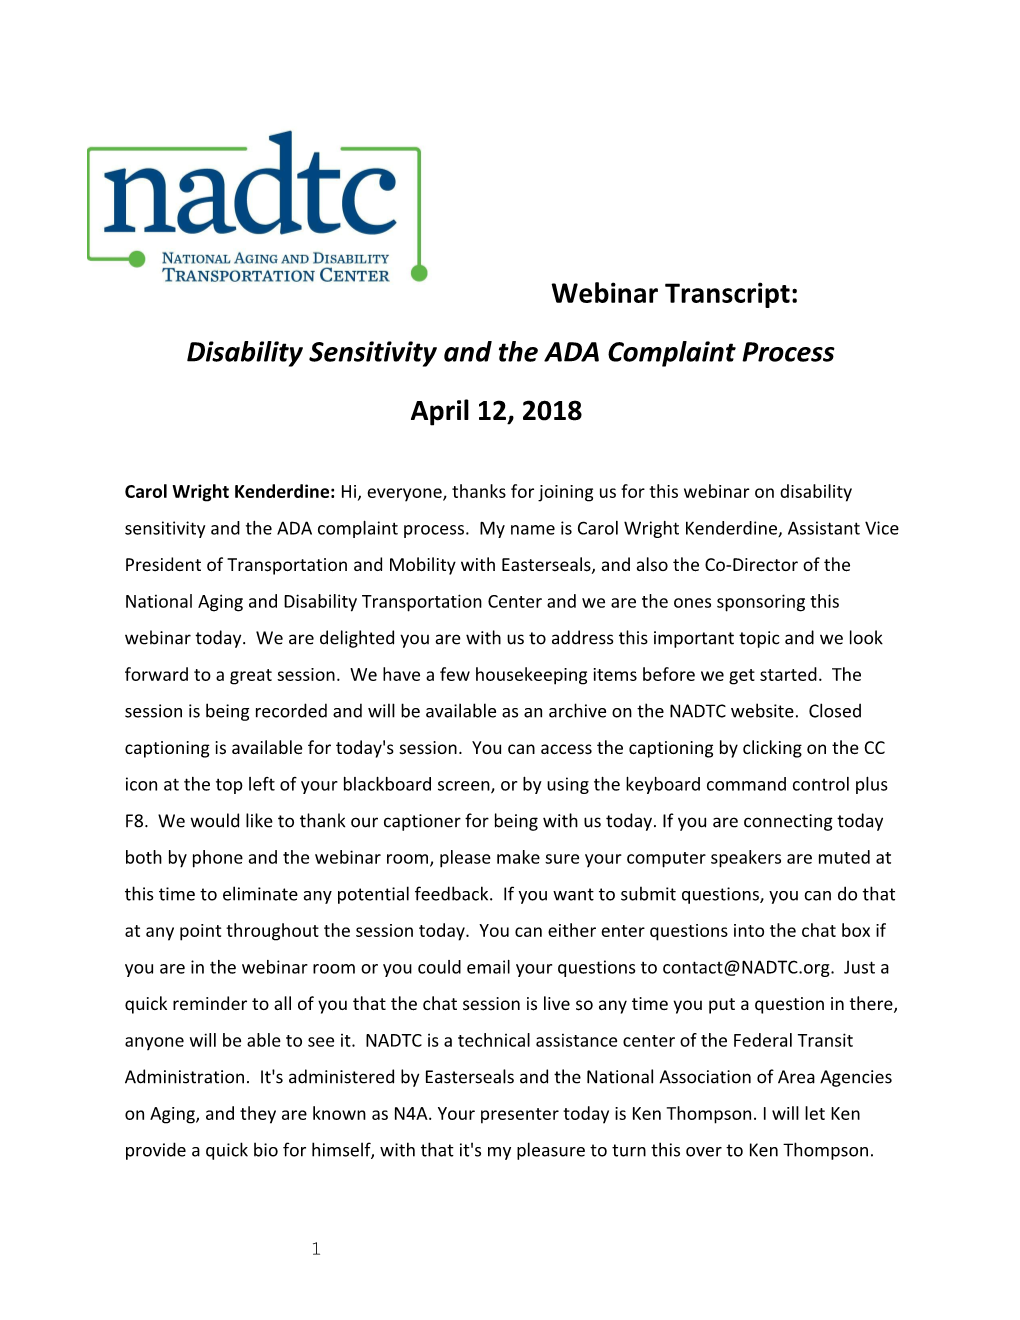 Disability Sensitivity and the ADA Complaint Process